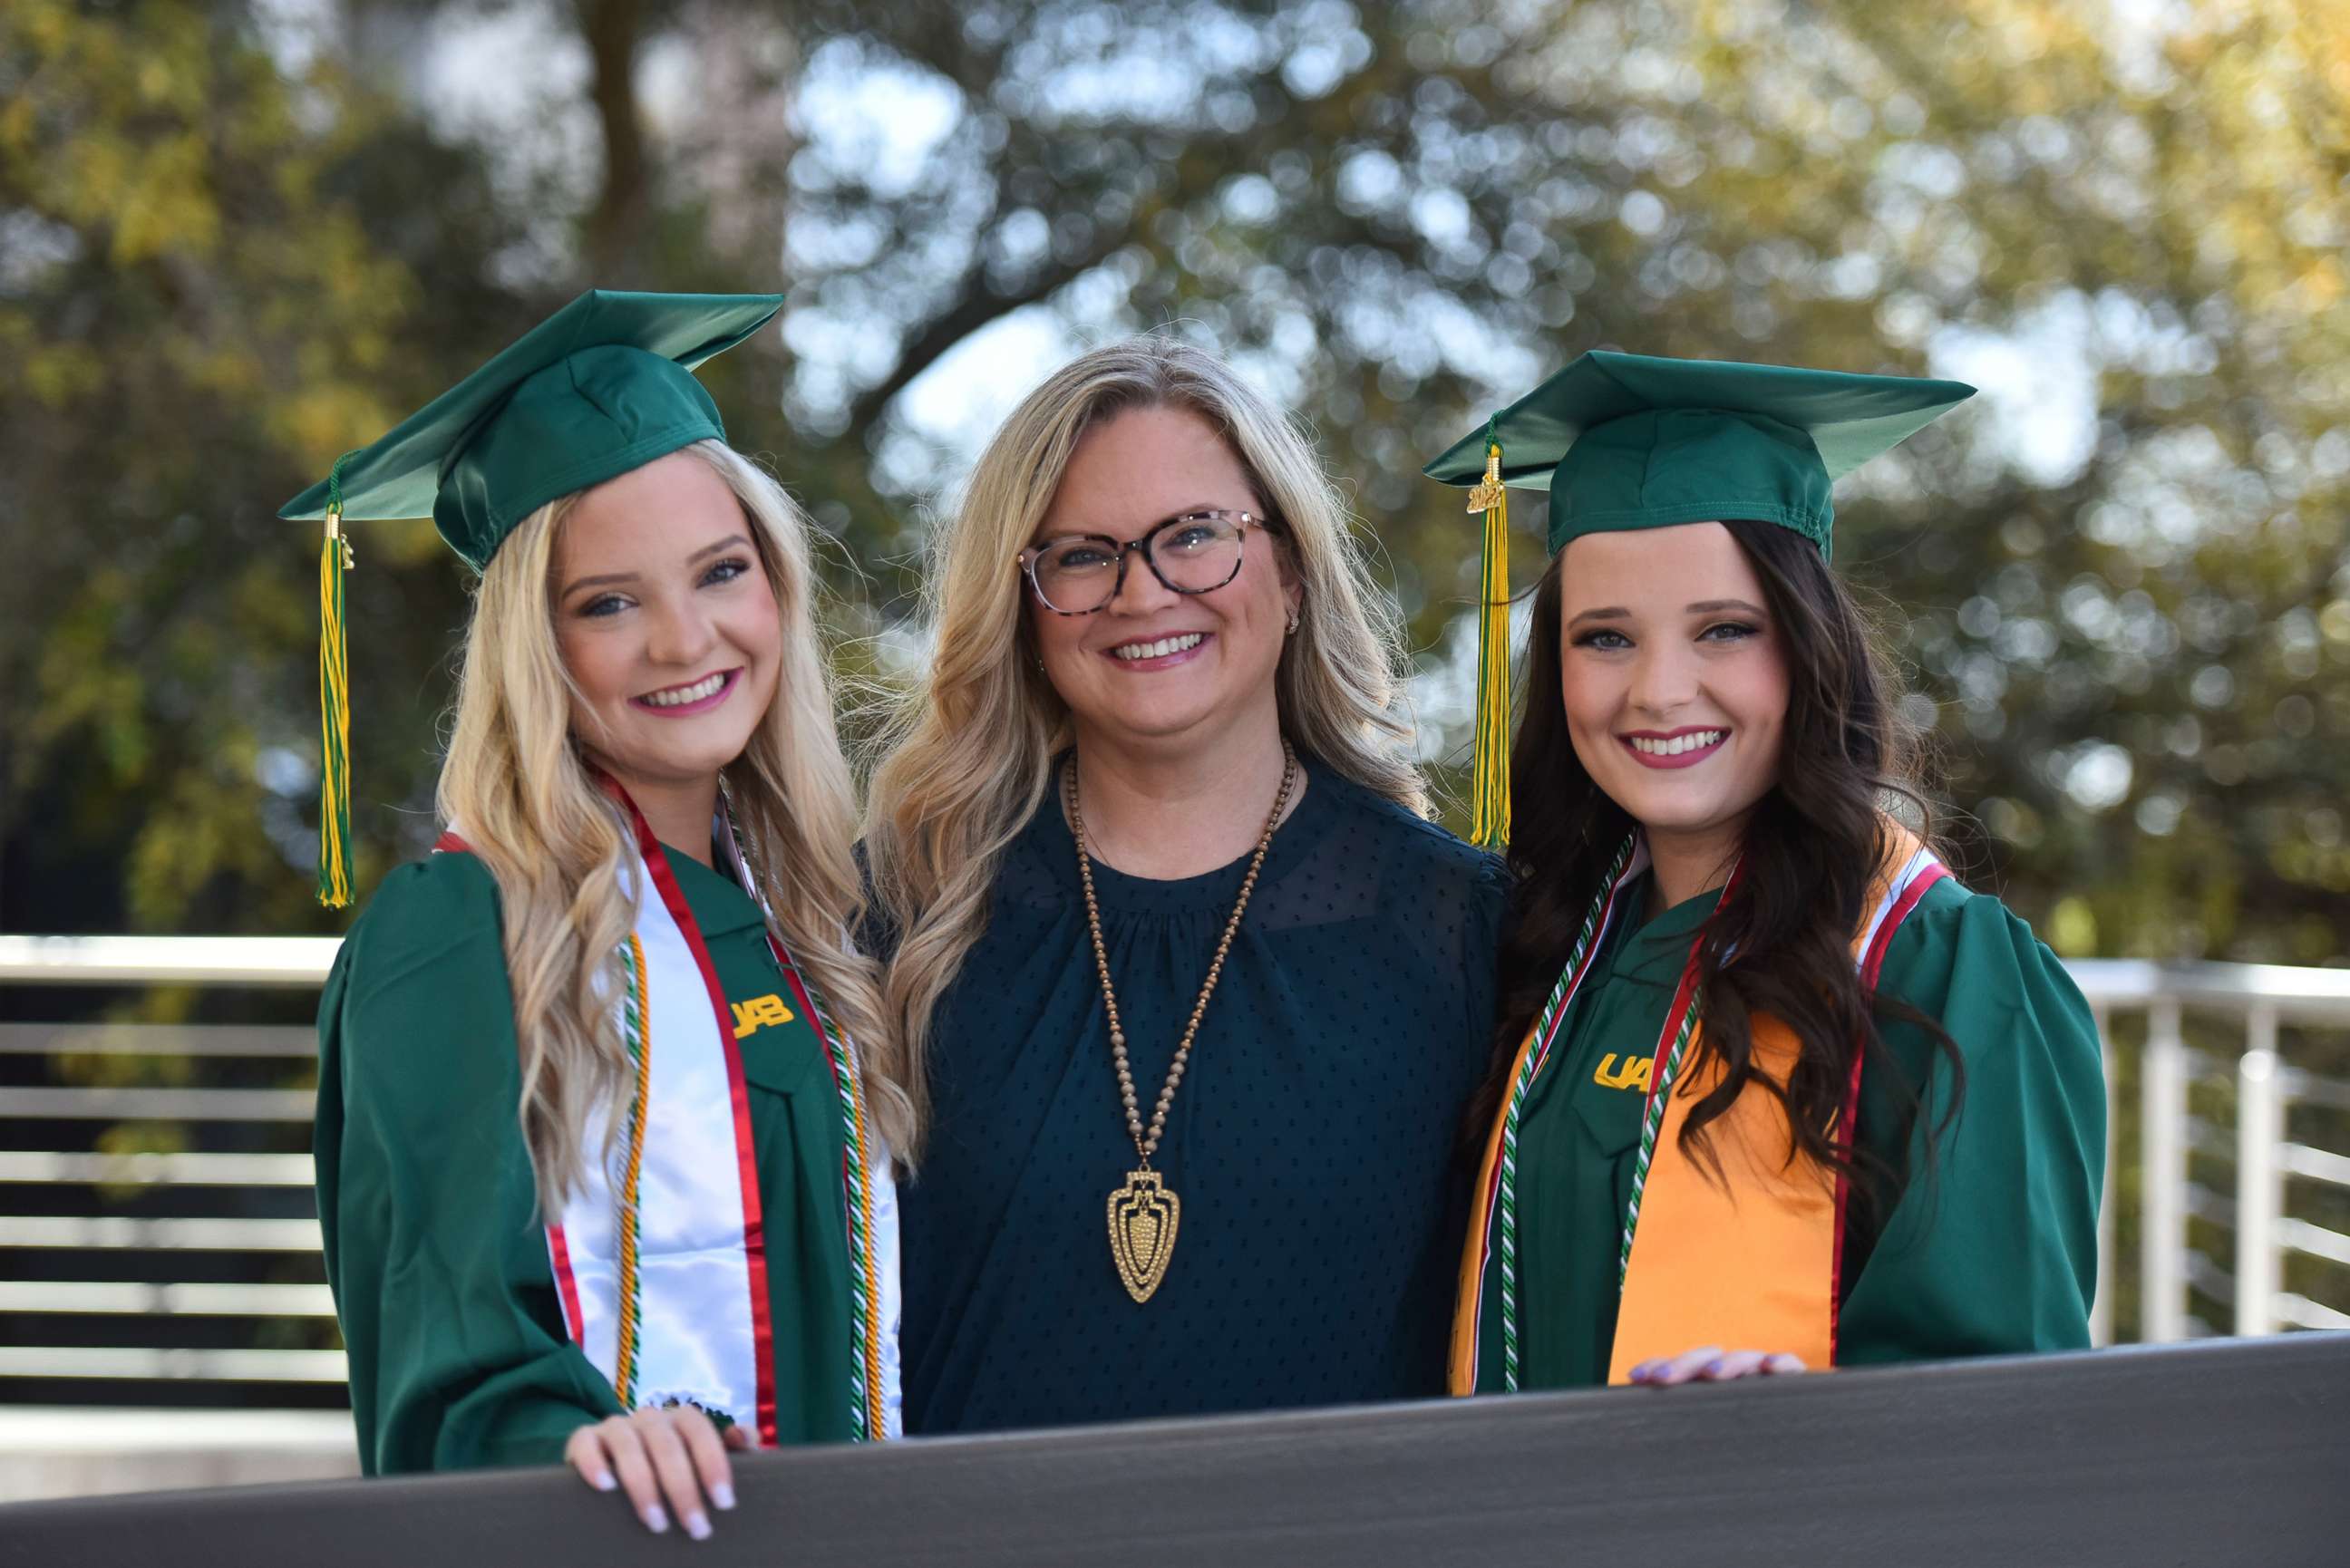 PHOTO: Tara Wood (center) with her twin daughters, Taylor England and Jade England, who both graduated from the University of Alabama at Birmingham this spring.